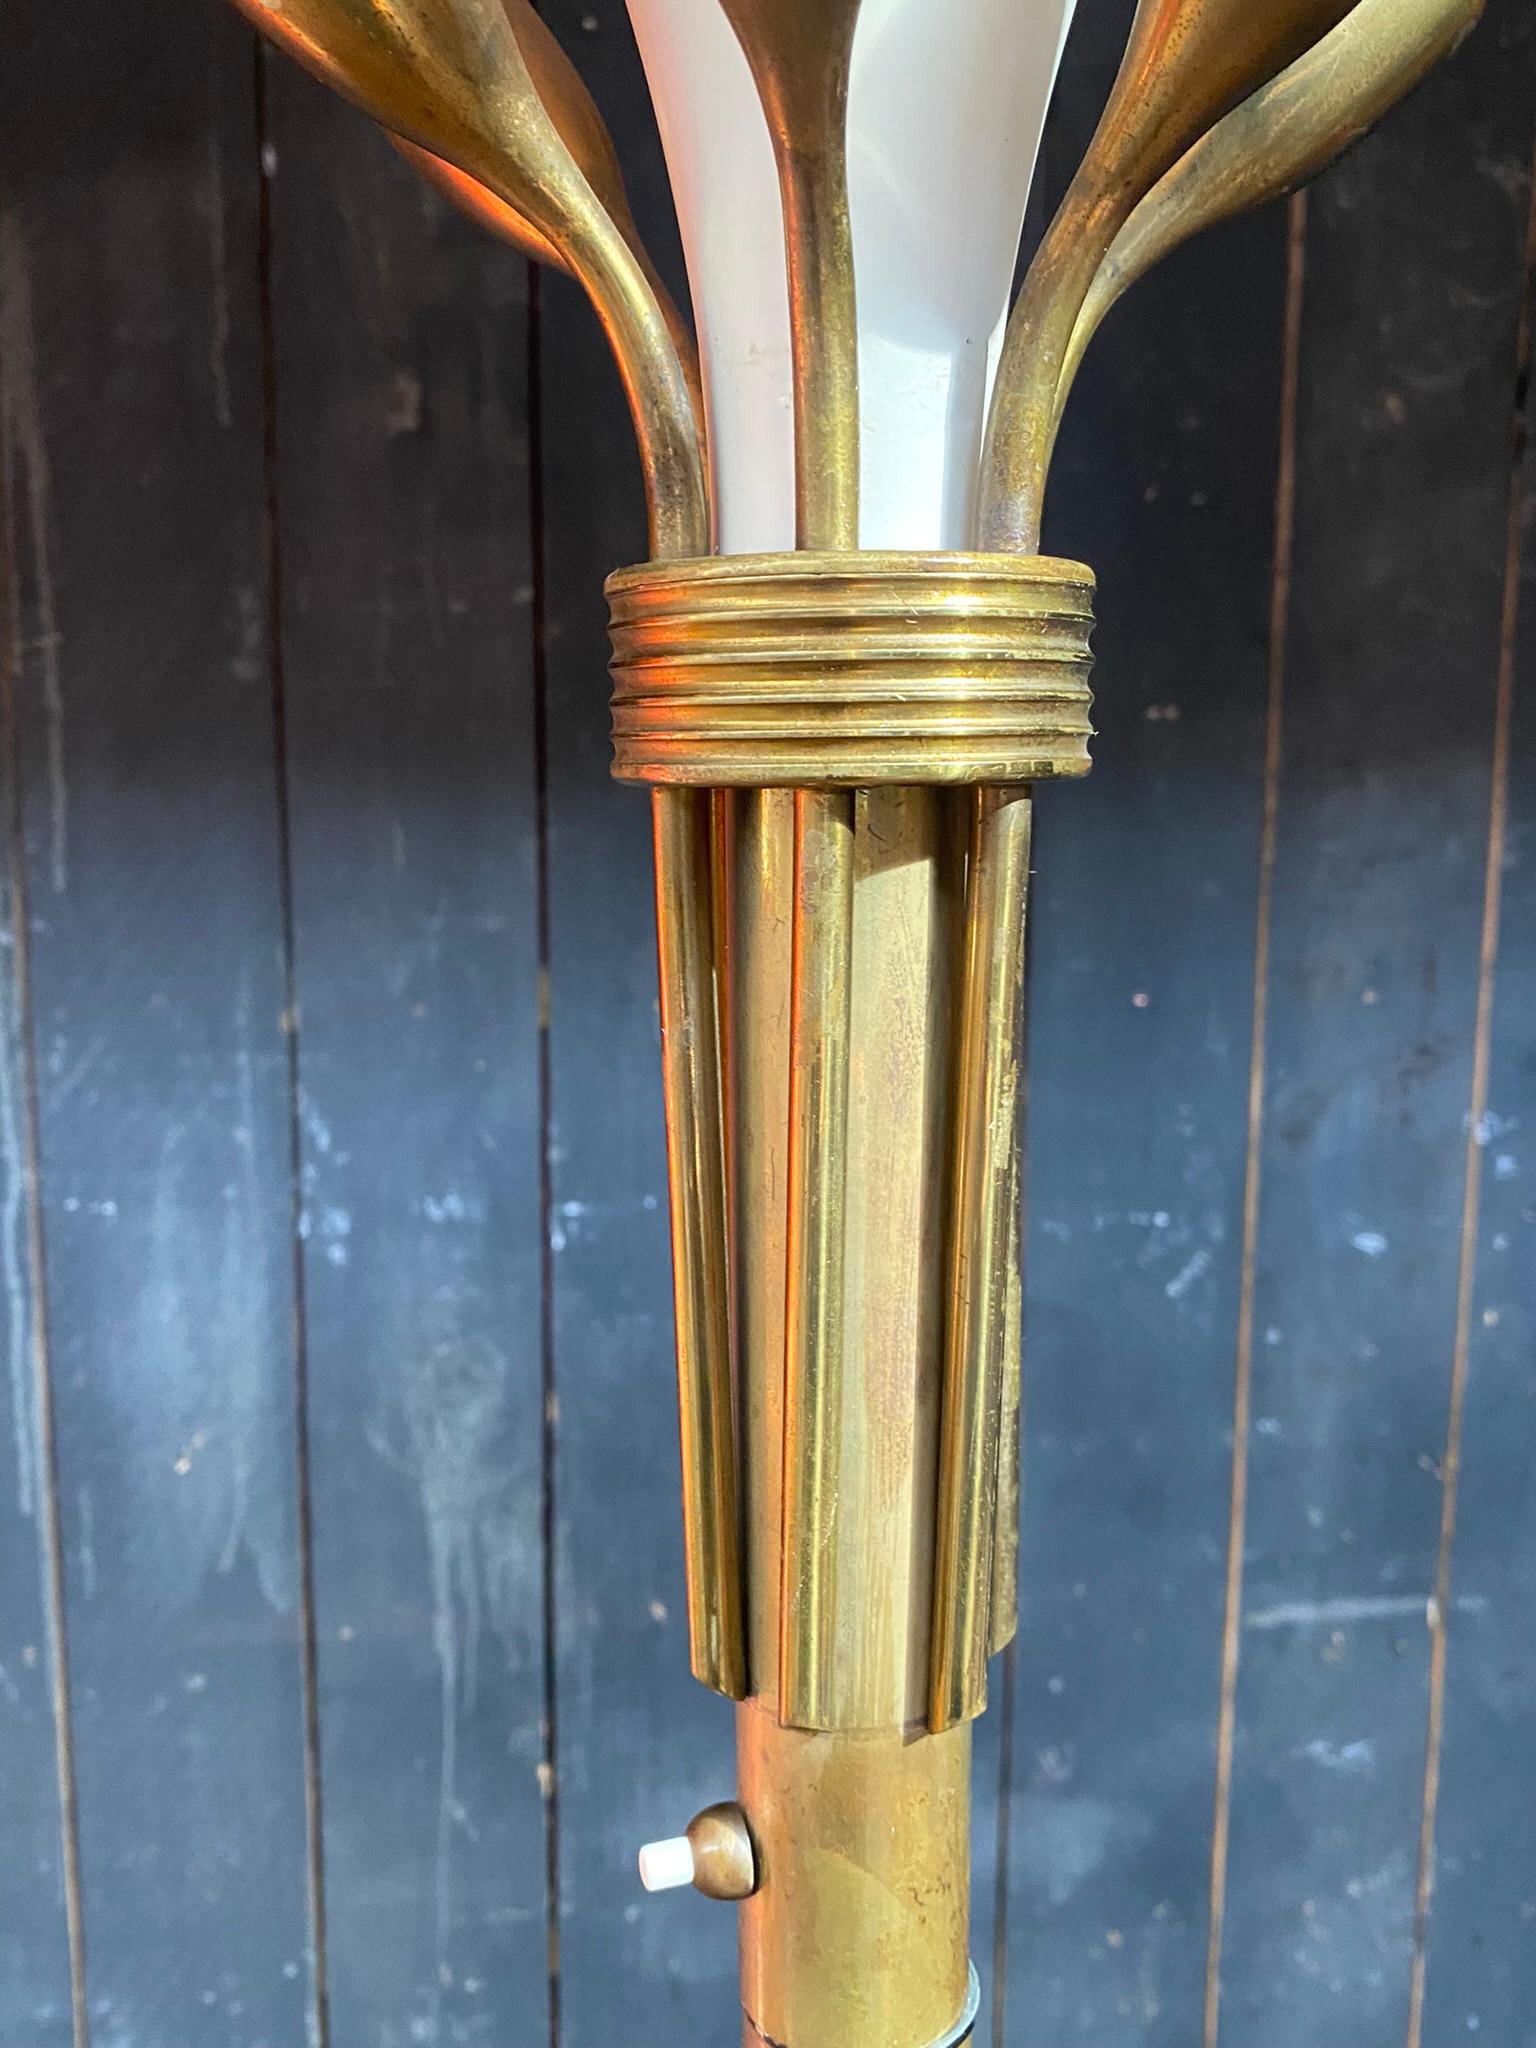 Mid-20th Century Italian Floor Lamp in Lacquered Metal, Brass, and Glass, circa 1950 For Sale